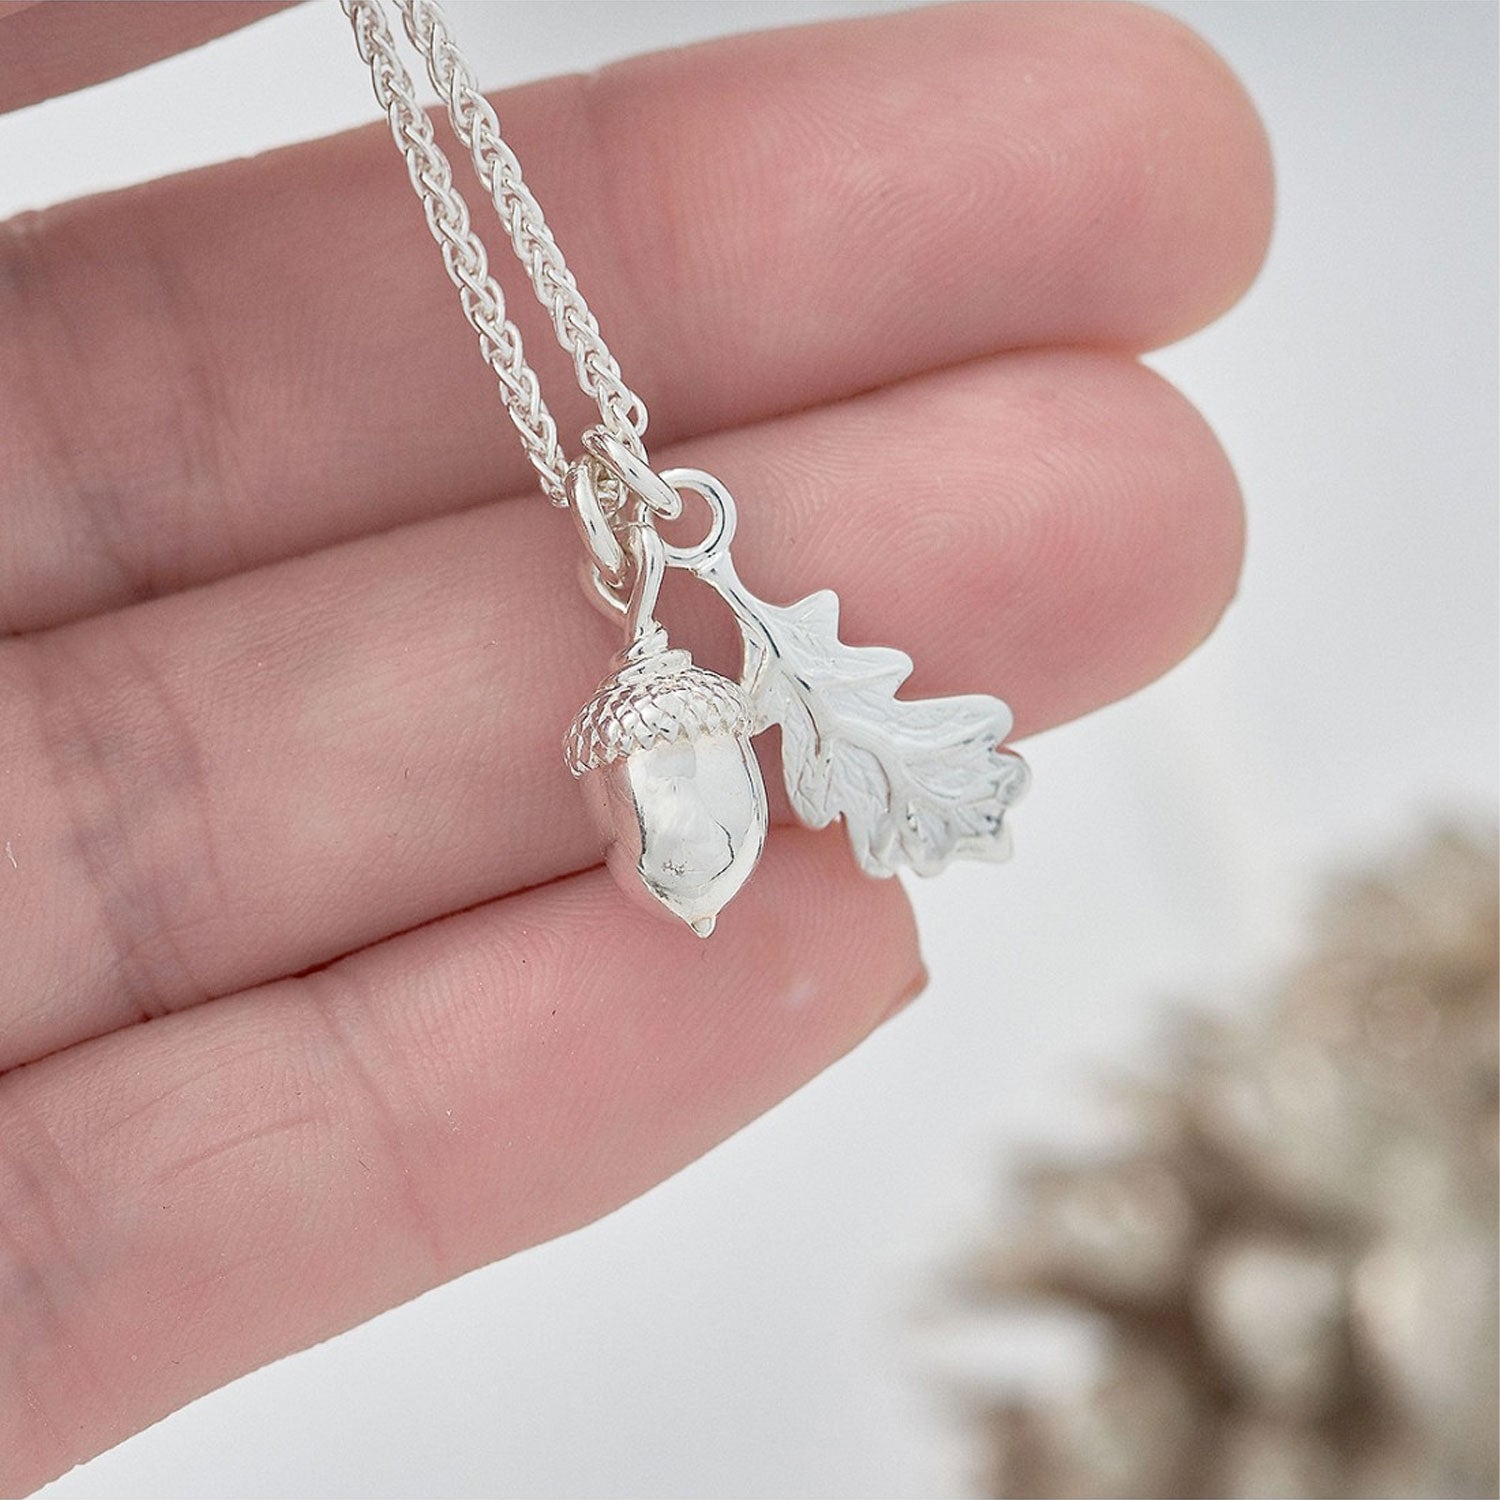 Scarlett Jewellery Solid Silver Acorn and Oak Leaf Necklace - Nature-Inspired Elegance with Expert Craftsmanship